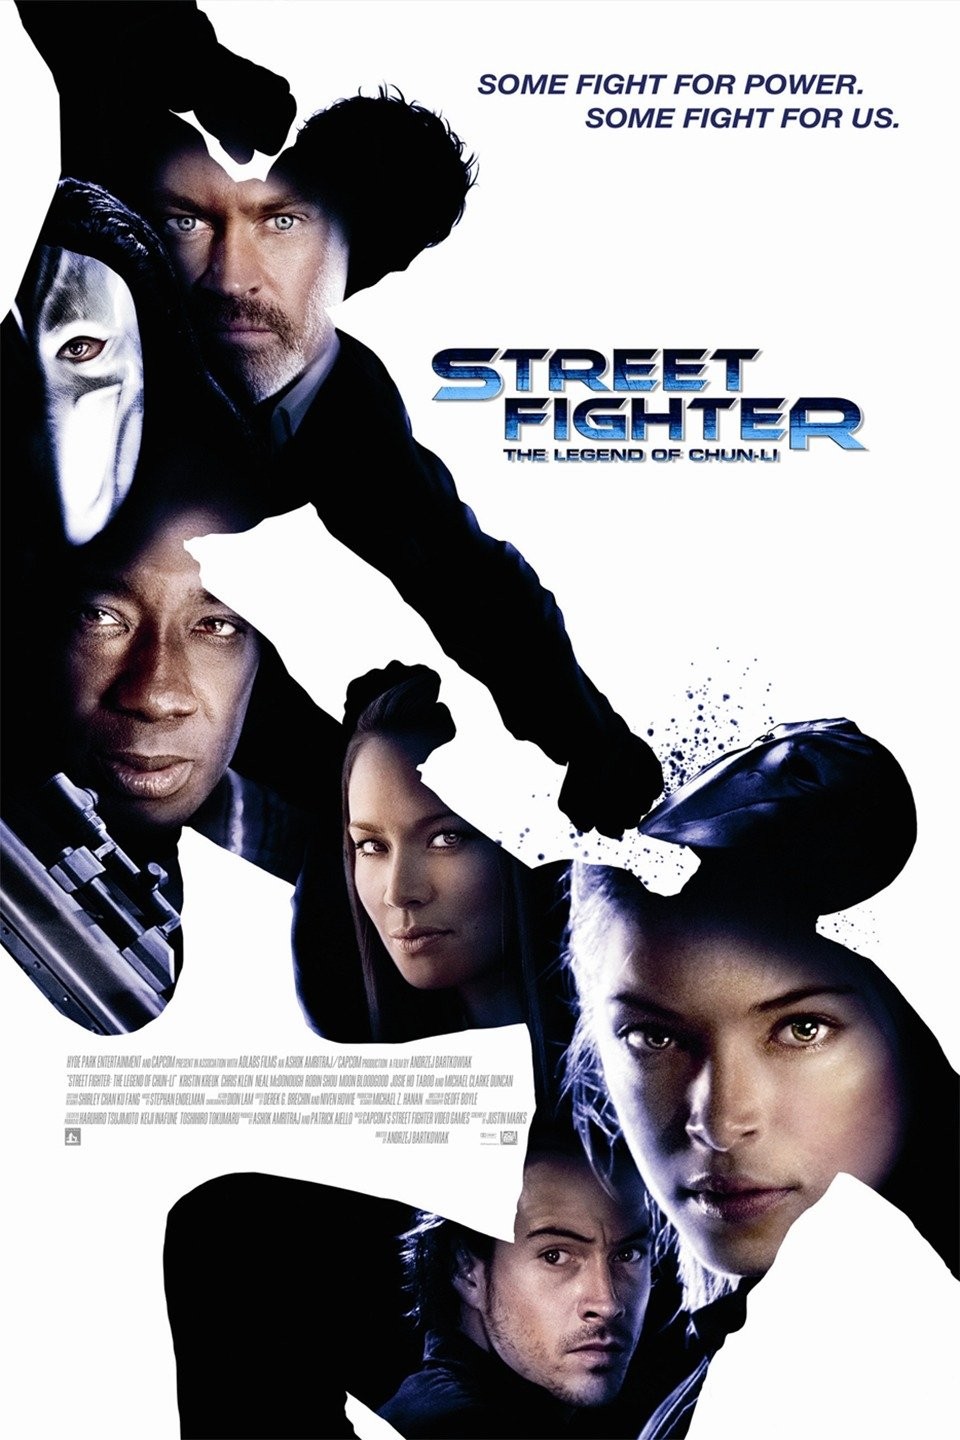 Street Fighter - Review - Photos - Ozmovies